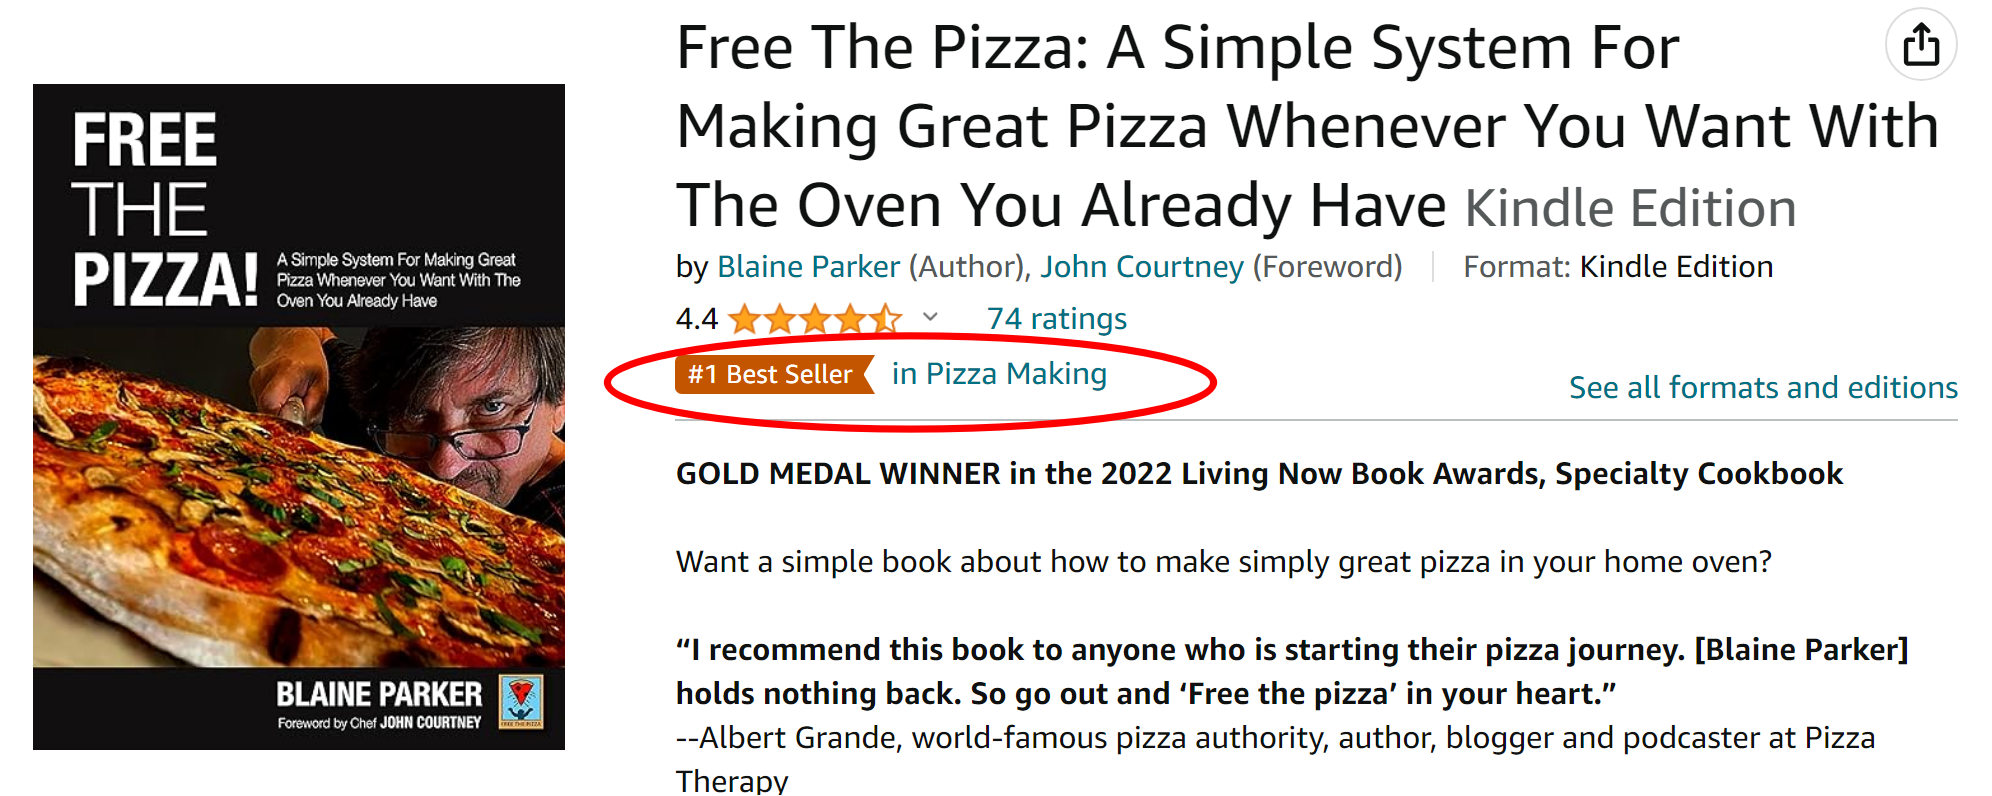 The Free The Pizza book was a #1 new release on Amazon